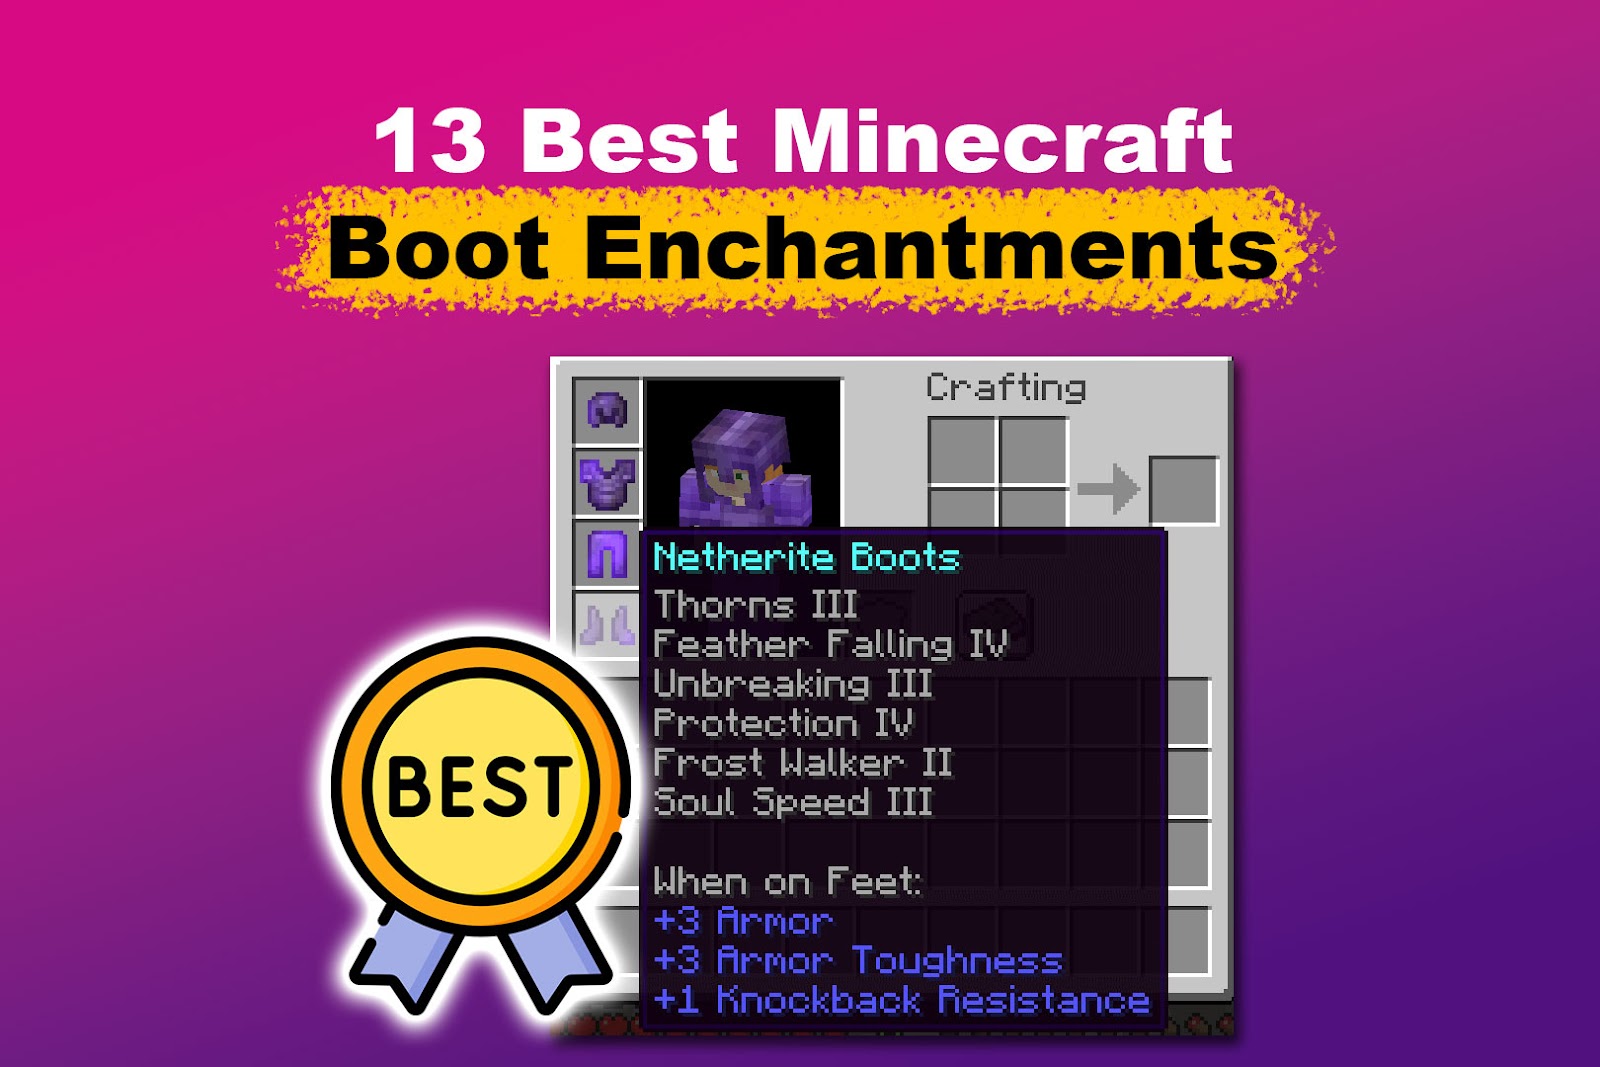 13 Best Minecraft Boots Enchantments [Ranked & Explained]